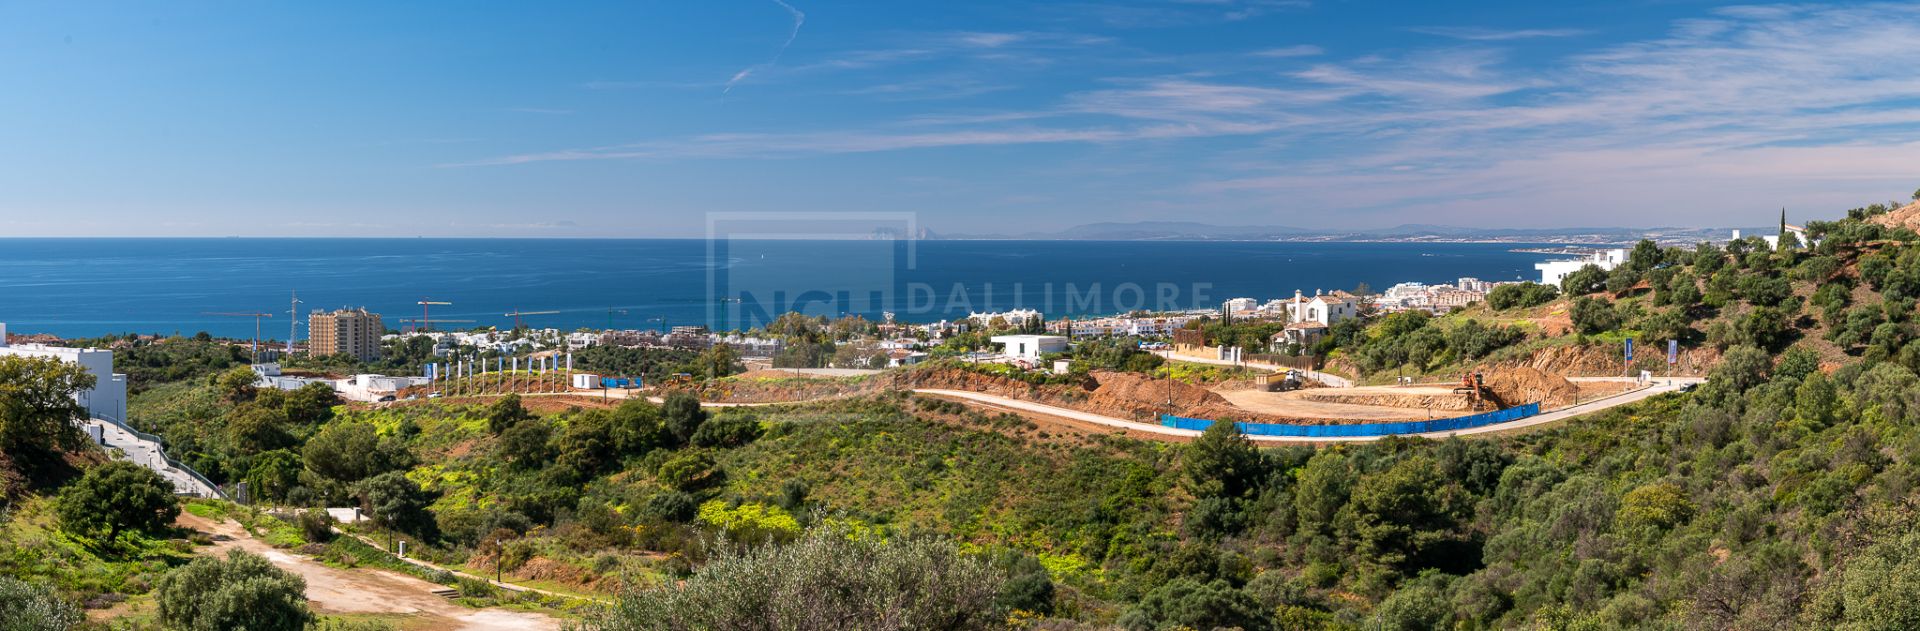 BRAND NEW LUXURY CONTEMPORARY 3-BEDROOM PENTHOUSE EAST MARBELLA